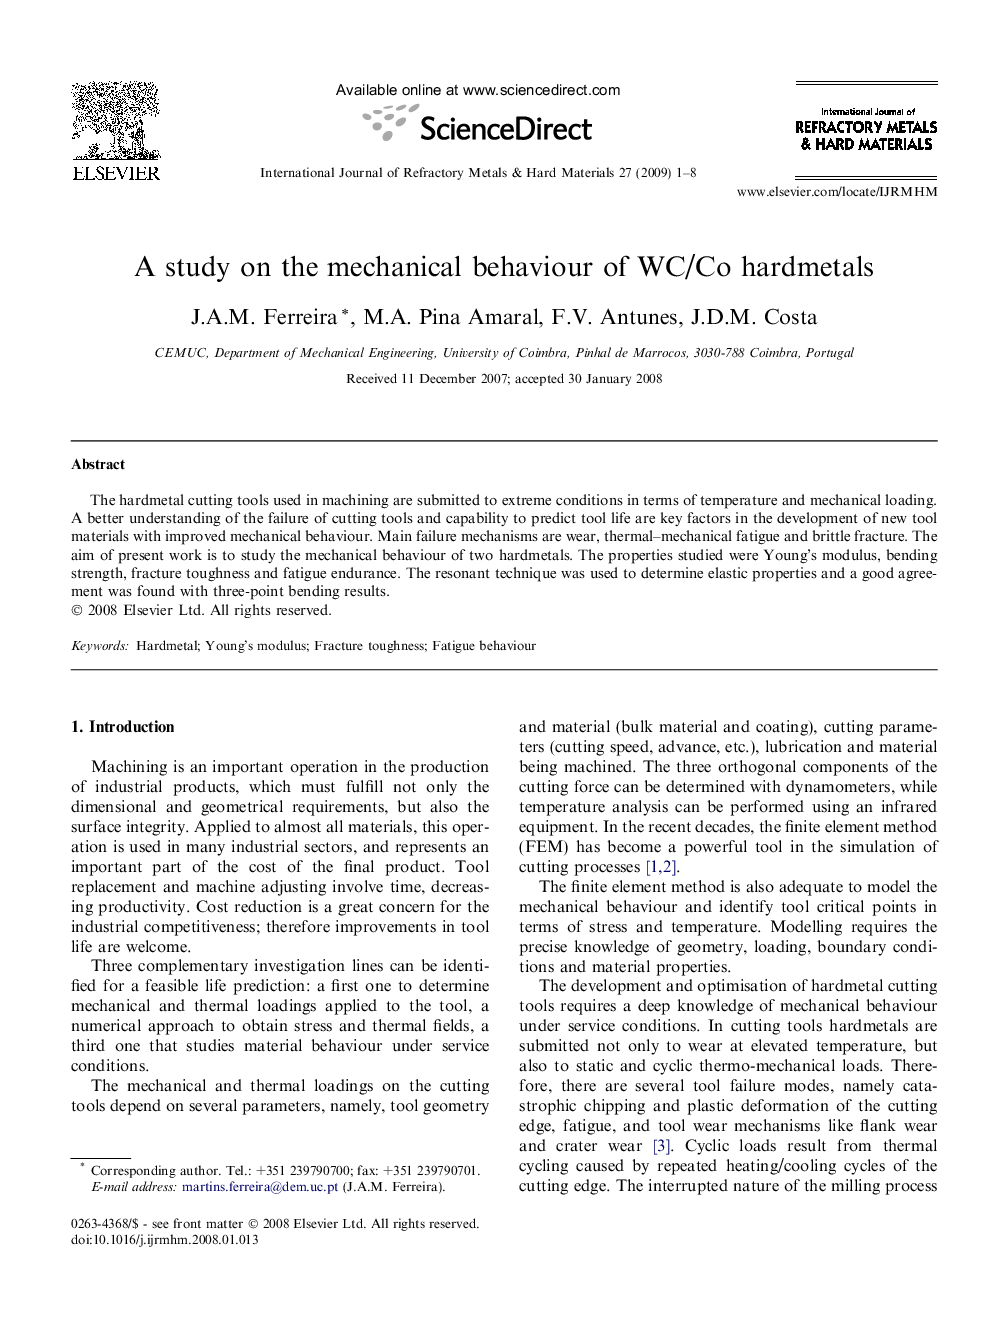 A study on the mechanical behaviour of WC/Co hardmetals